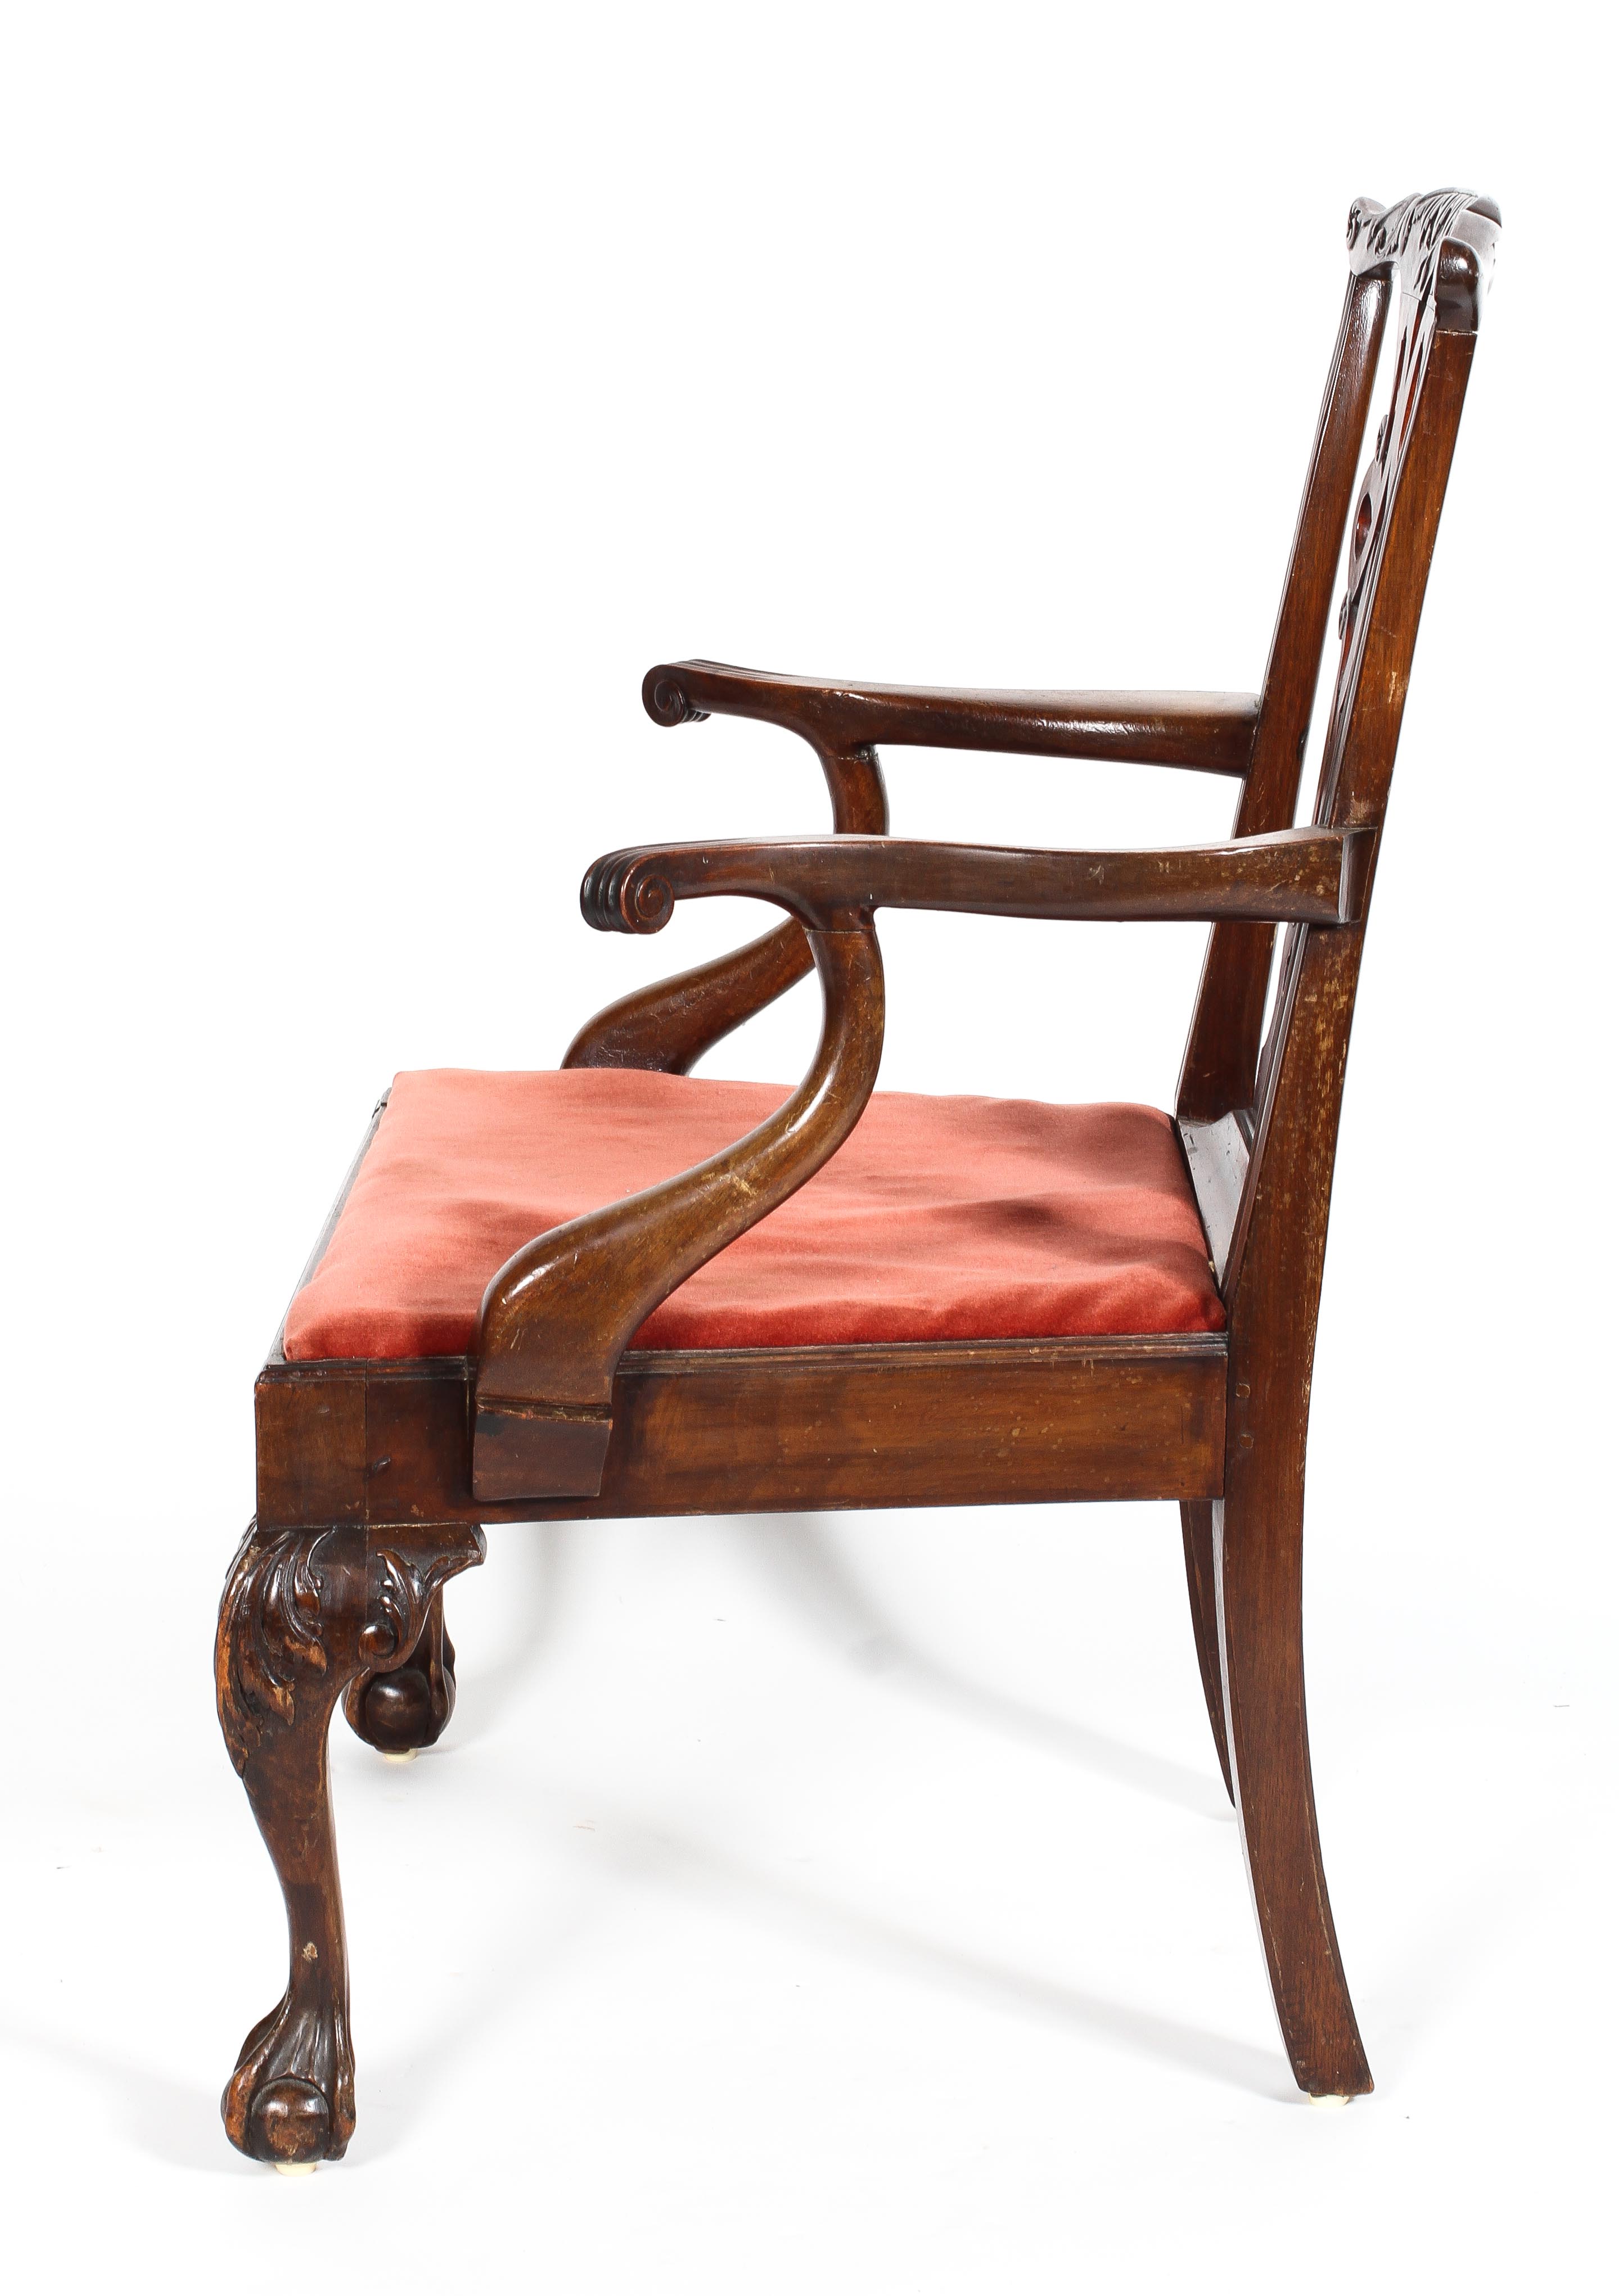 A George III mahogany armchair, the top rail carved with leaves and branches, with pierced splat, - Image 2 of 2